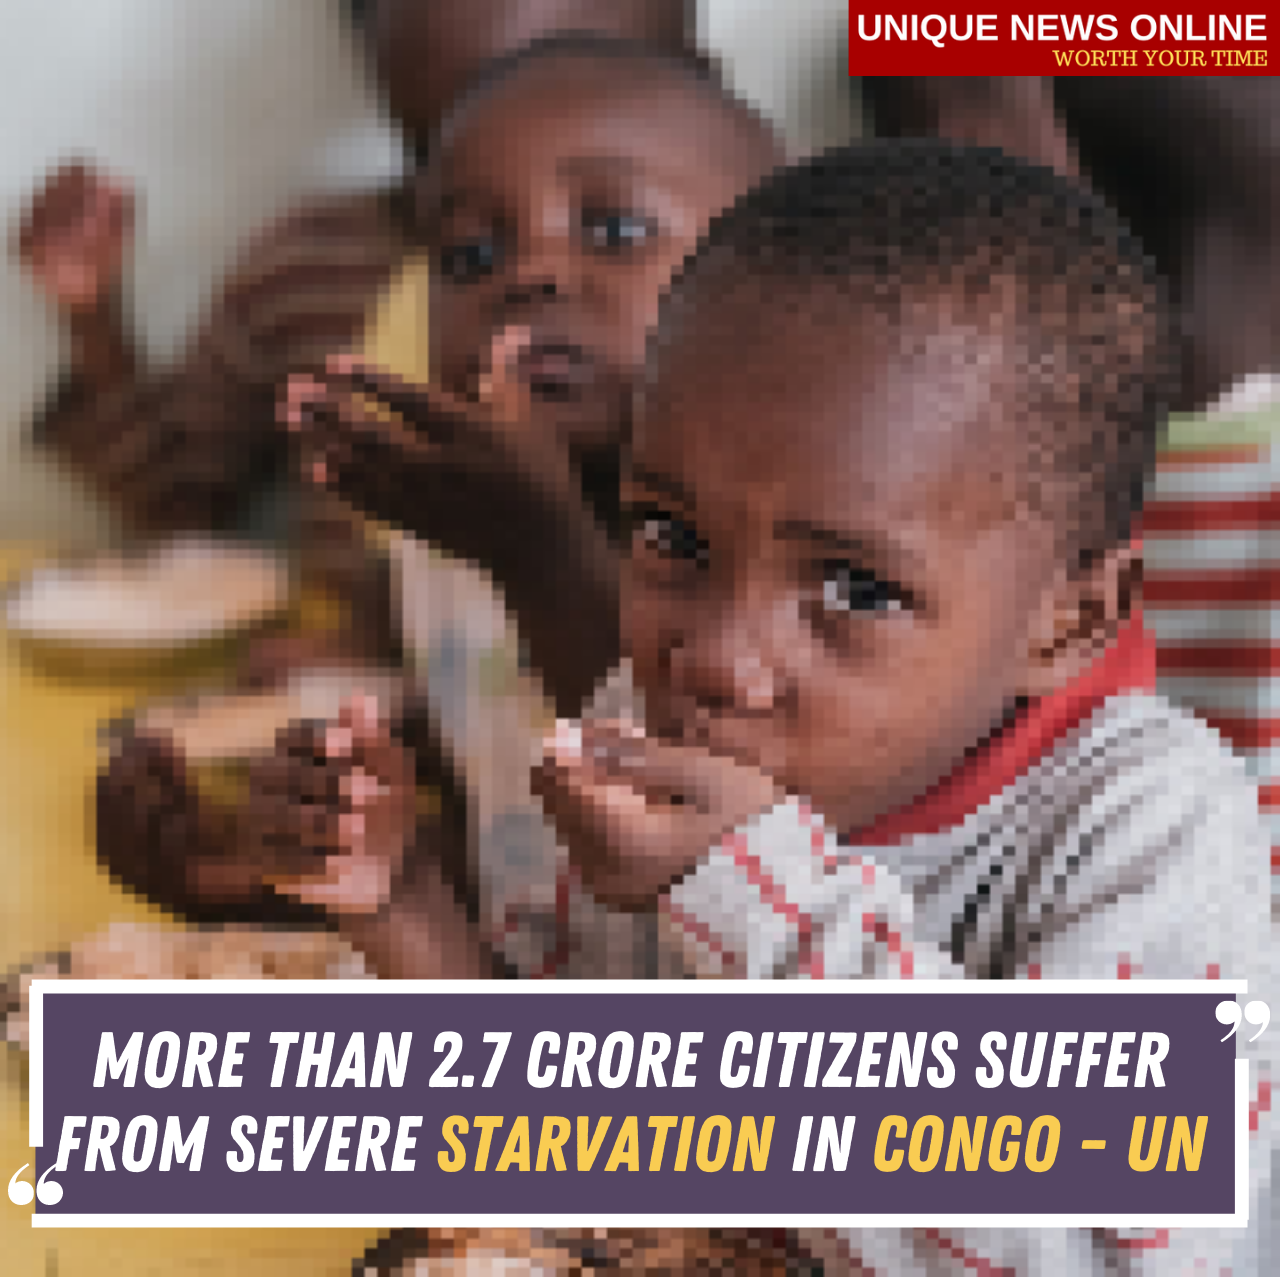 UN: More than 2.7 Crore Citizens suffer from severe hunger in Congo